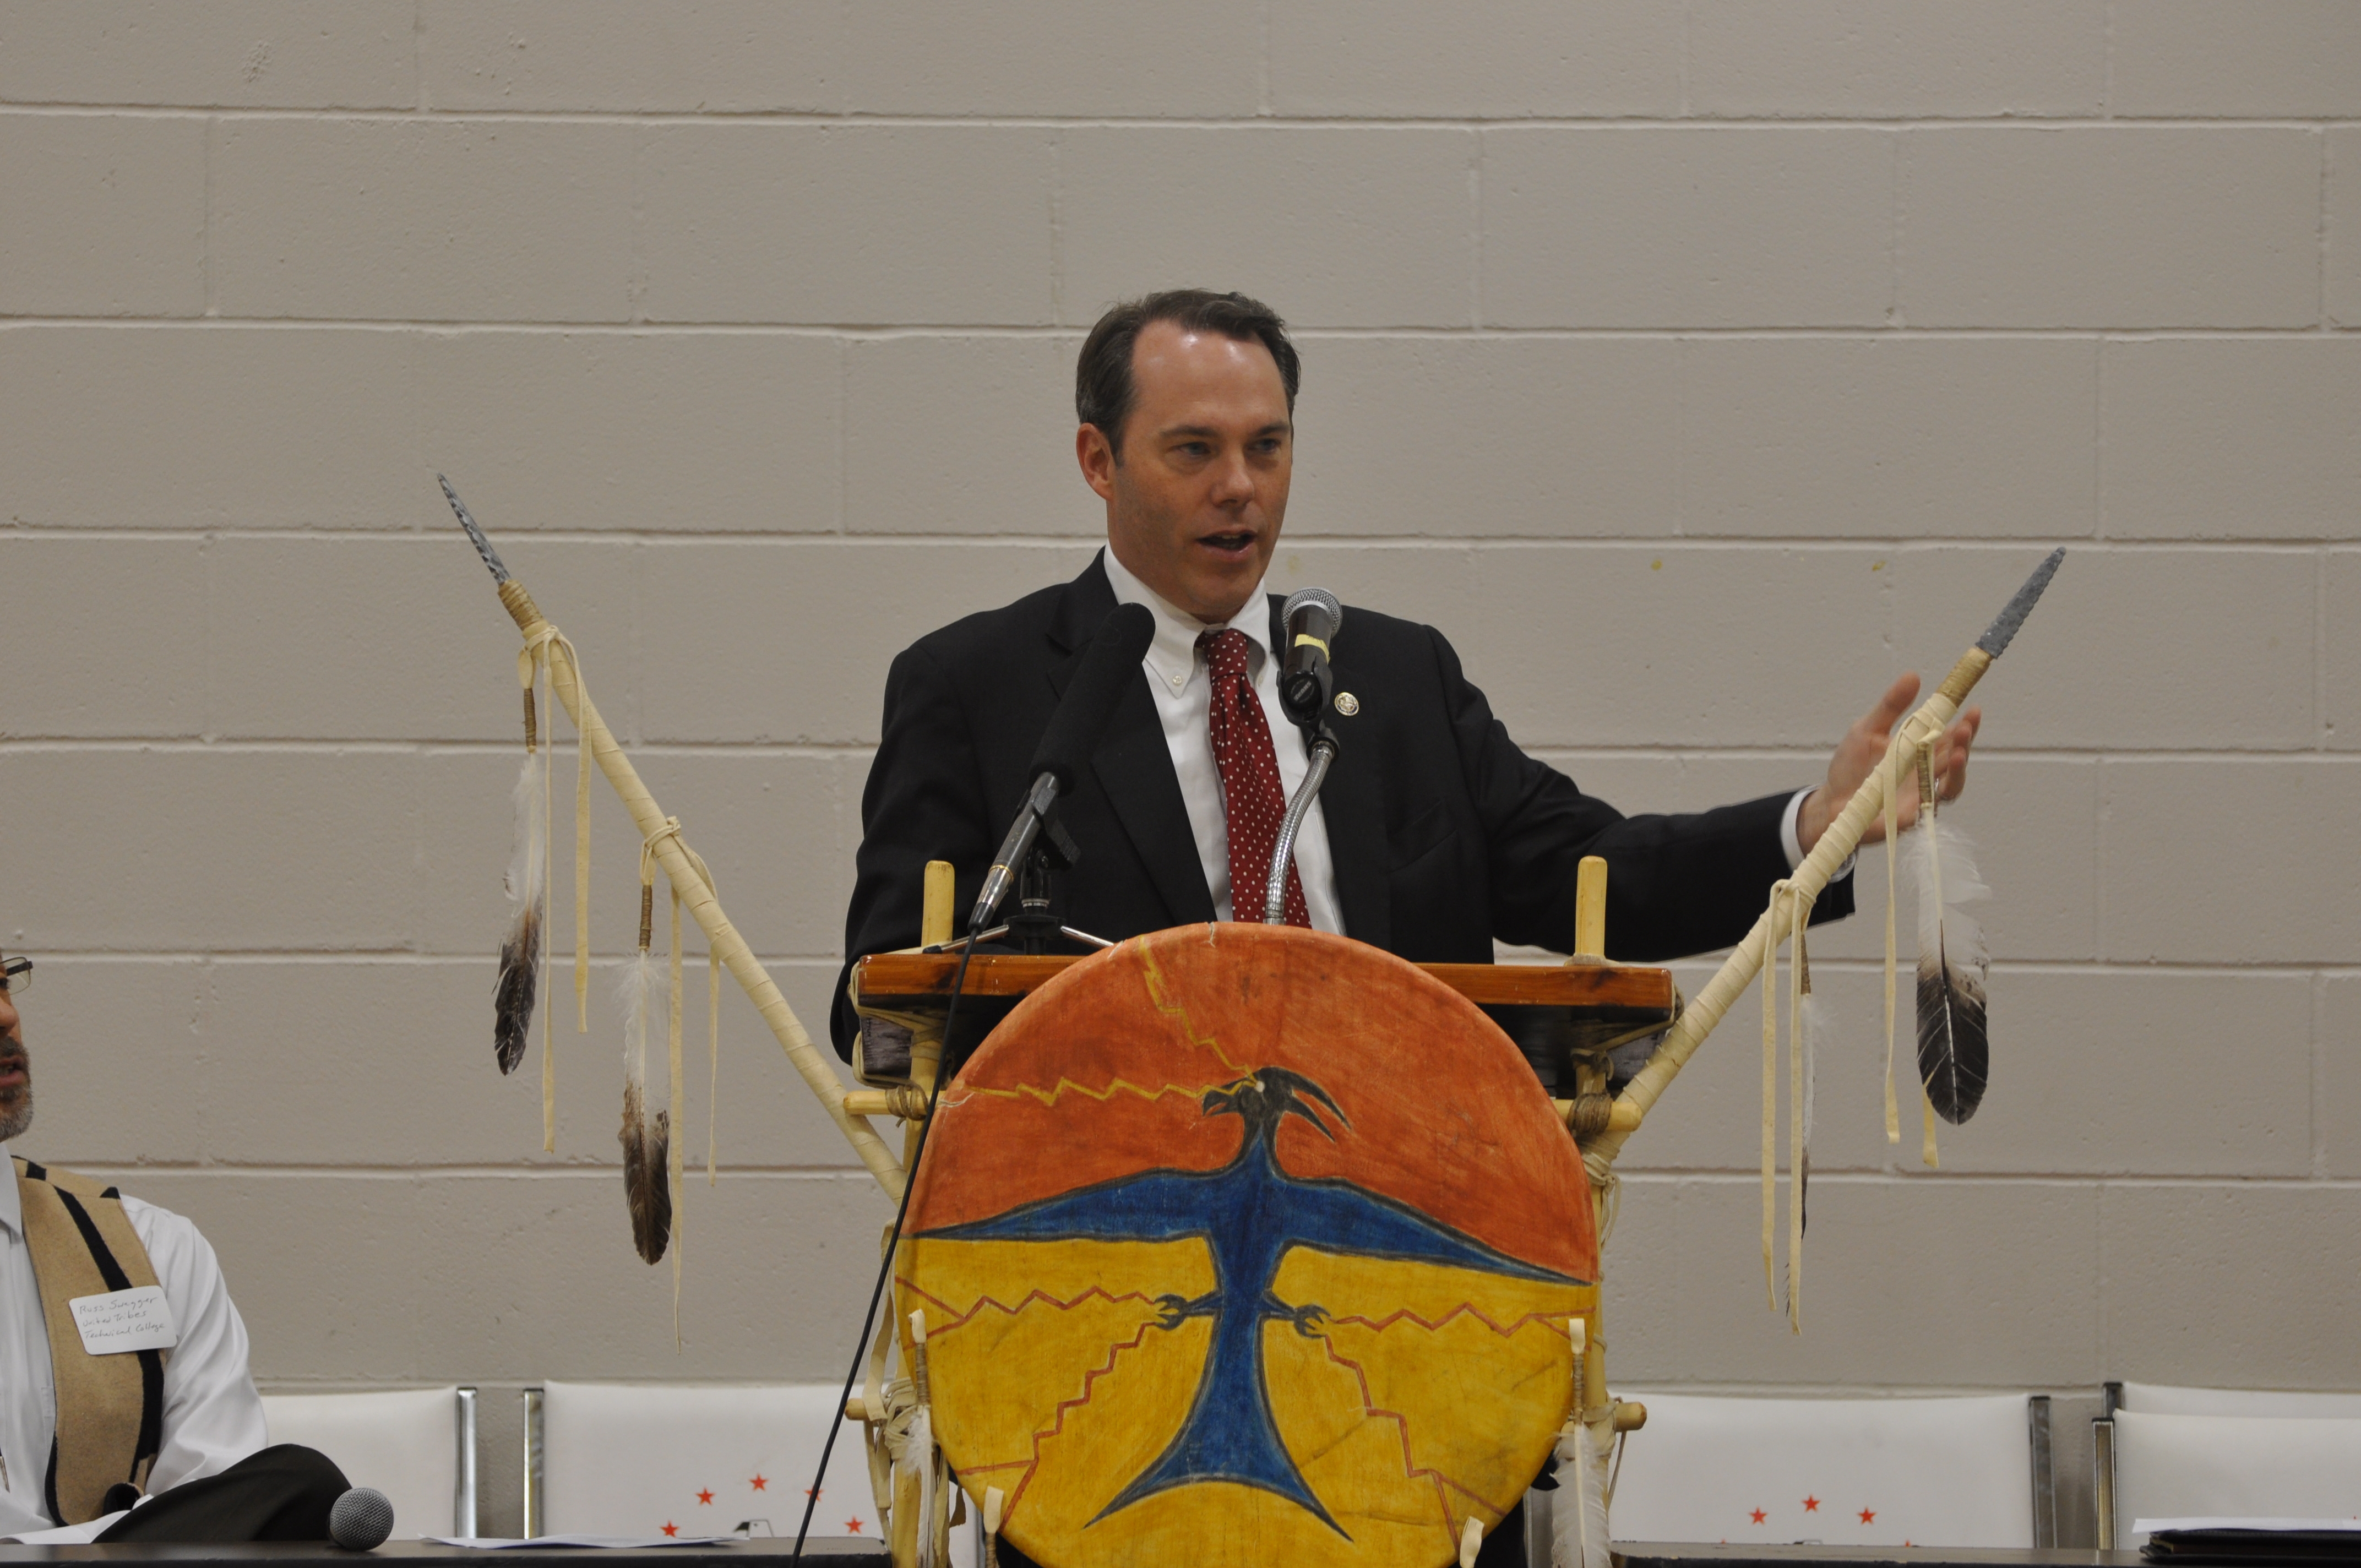 U.S. Attorney Tim Purdon speaks about 'One Year in Indian Country' at the Tribal Consultation Conference in Bismarck, N.D.